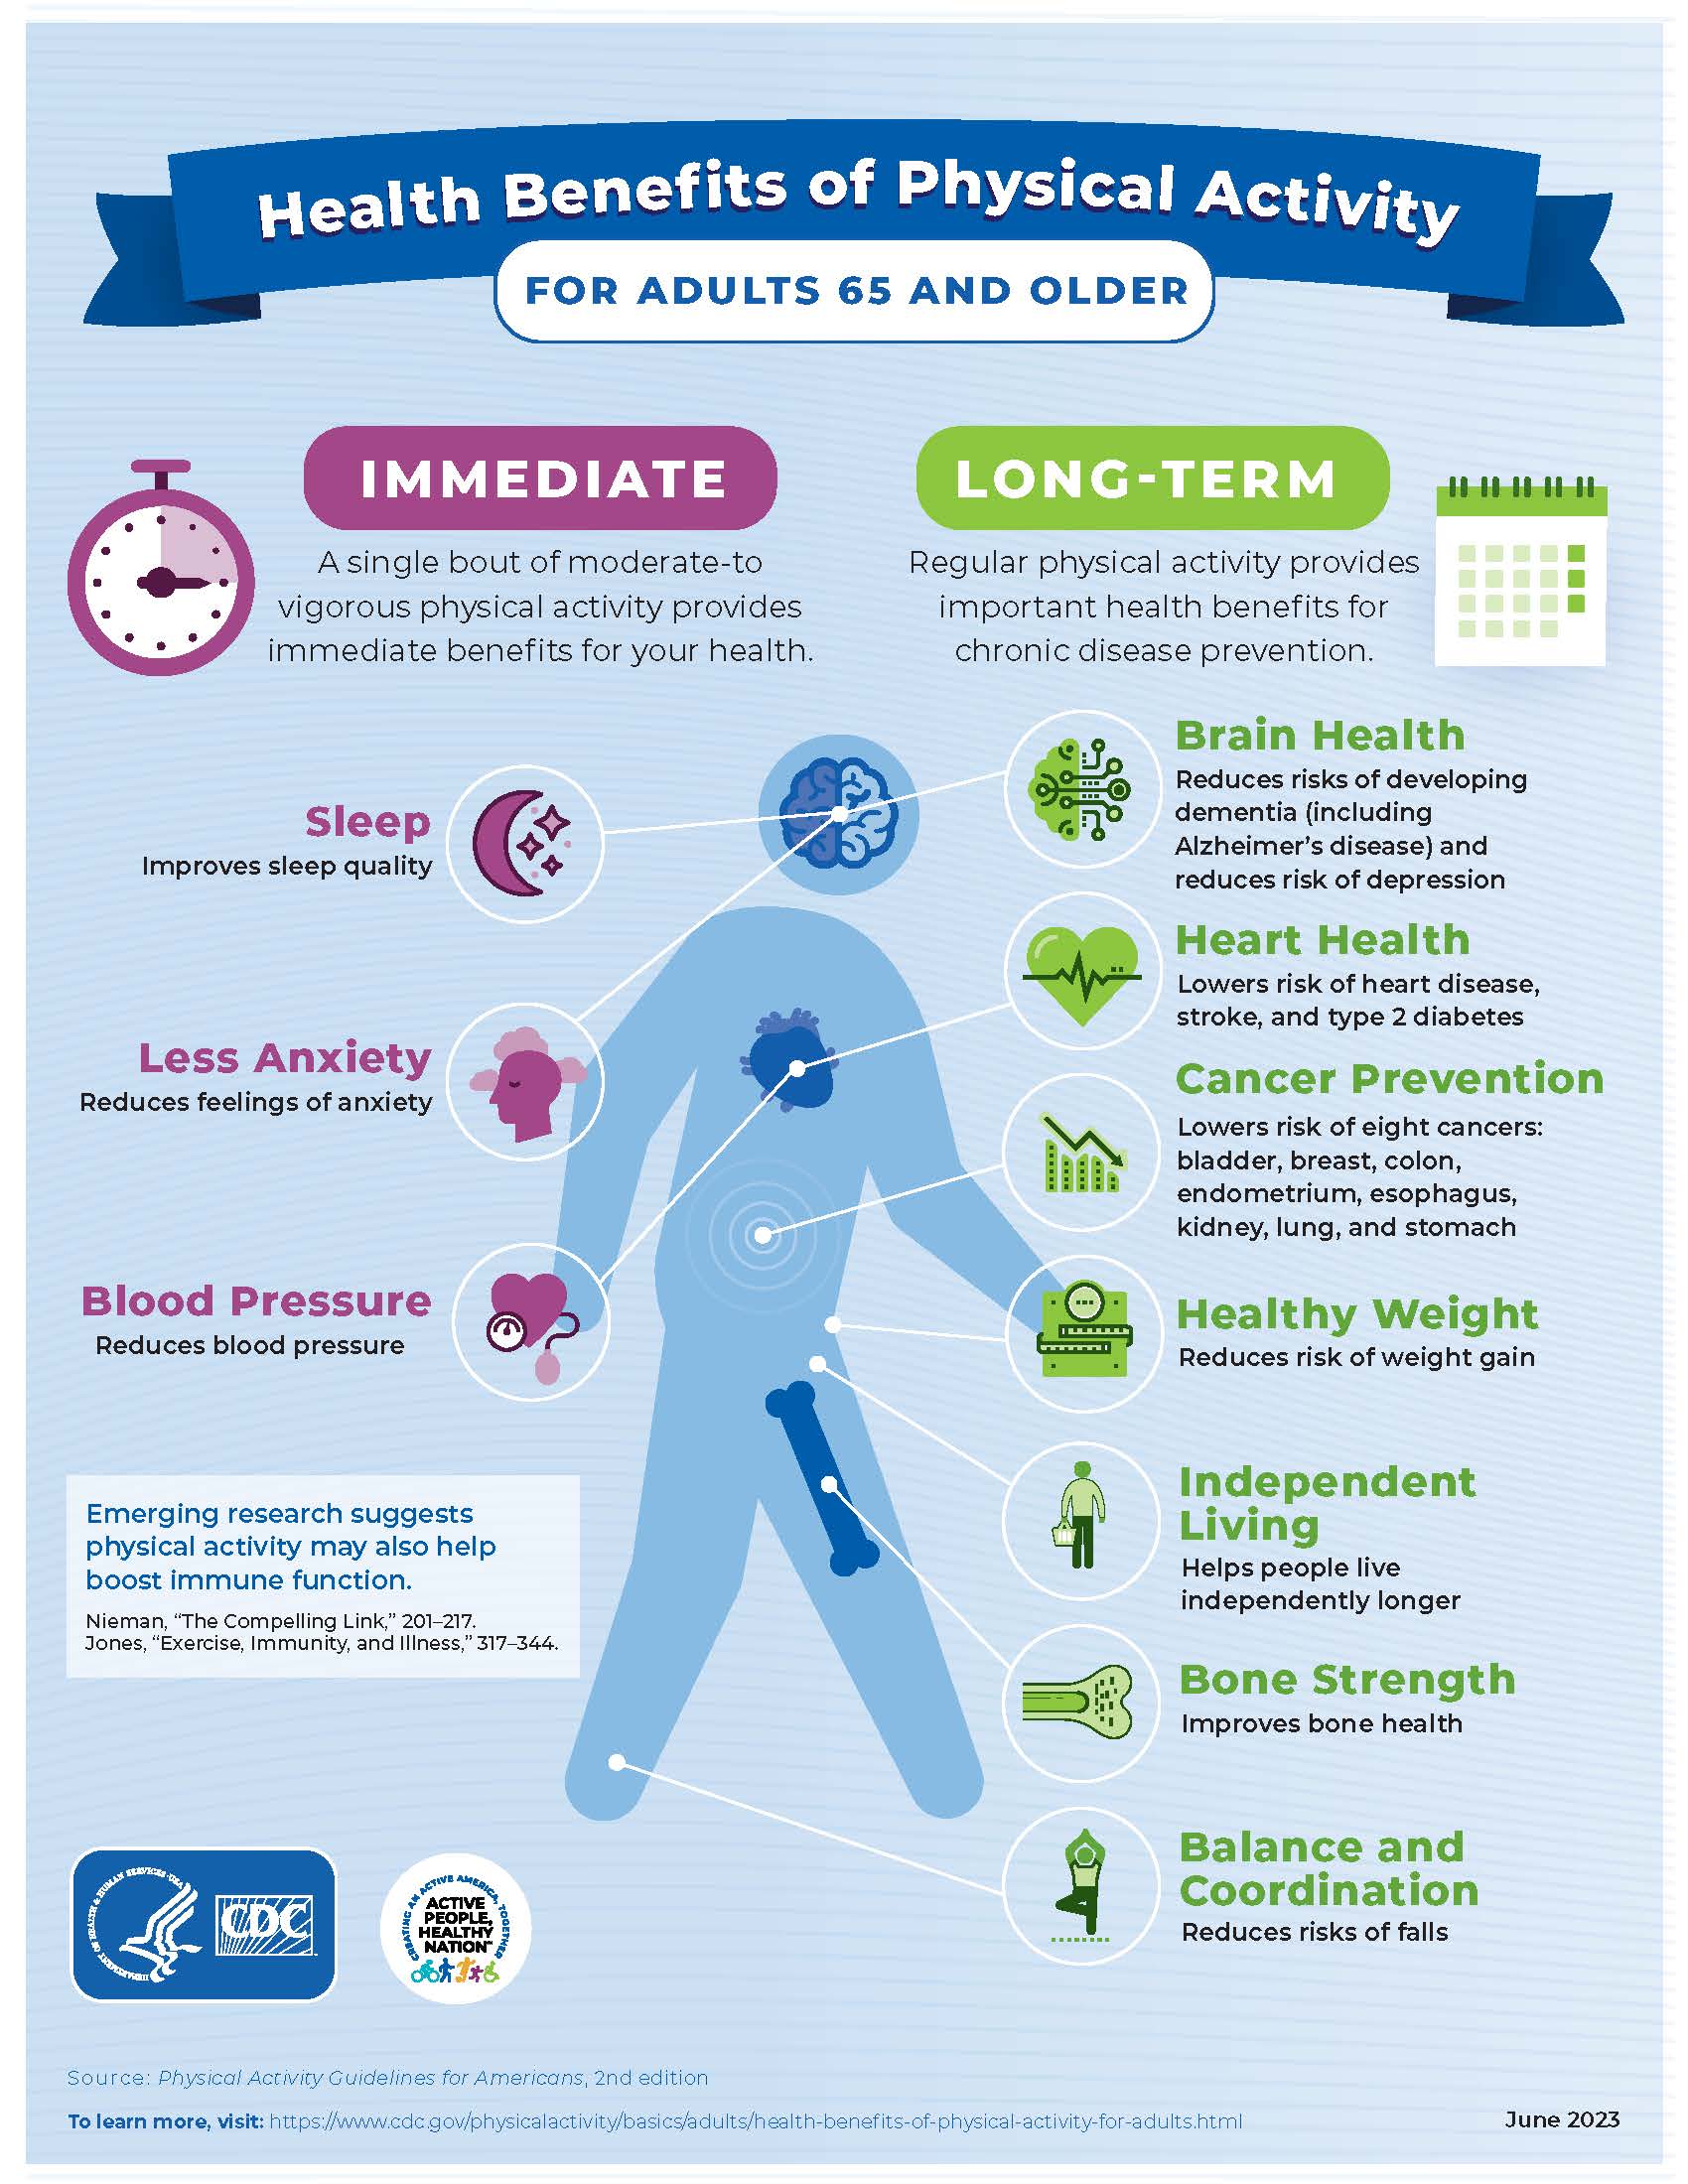 Health benefits for physical activity for adults 65 and older